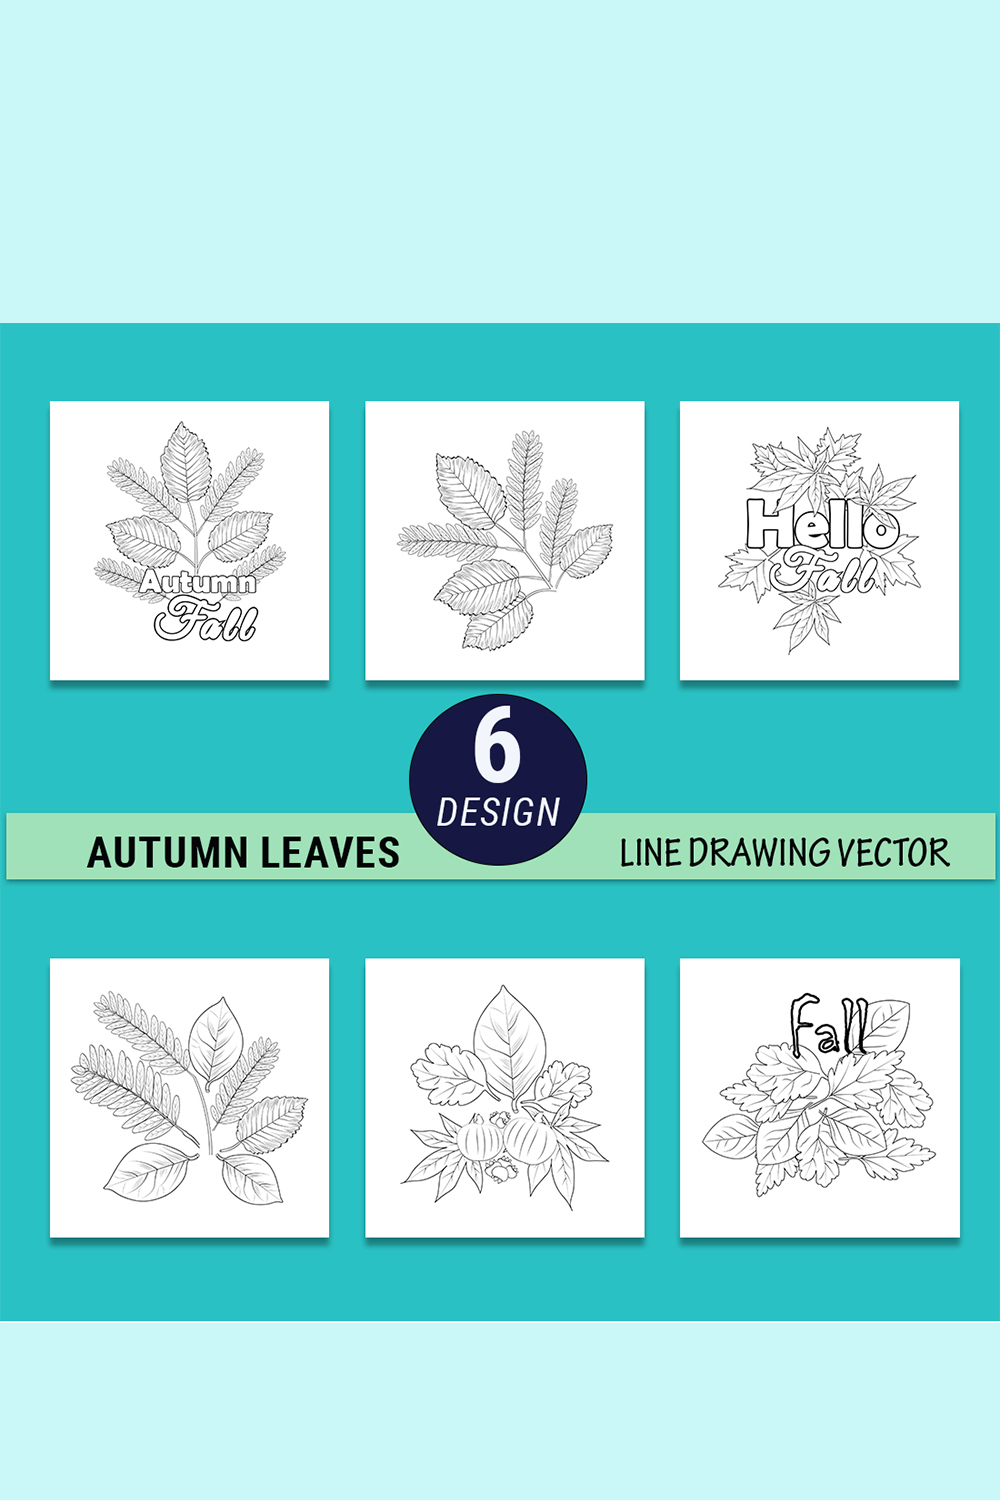 autumn coloring book for adults autumn coloring coloring book autumn leaves thanksgiving coloring pages pinterest preview image.